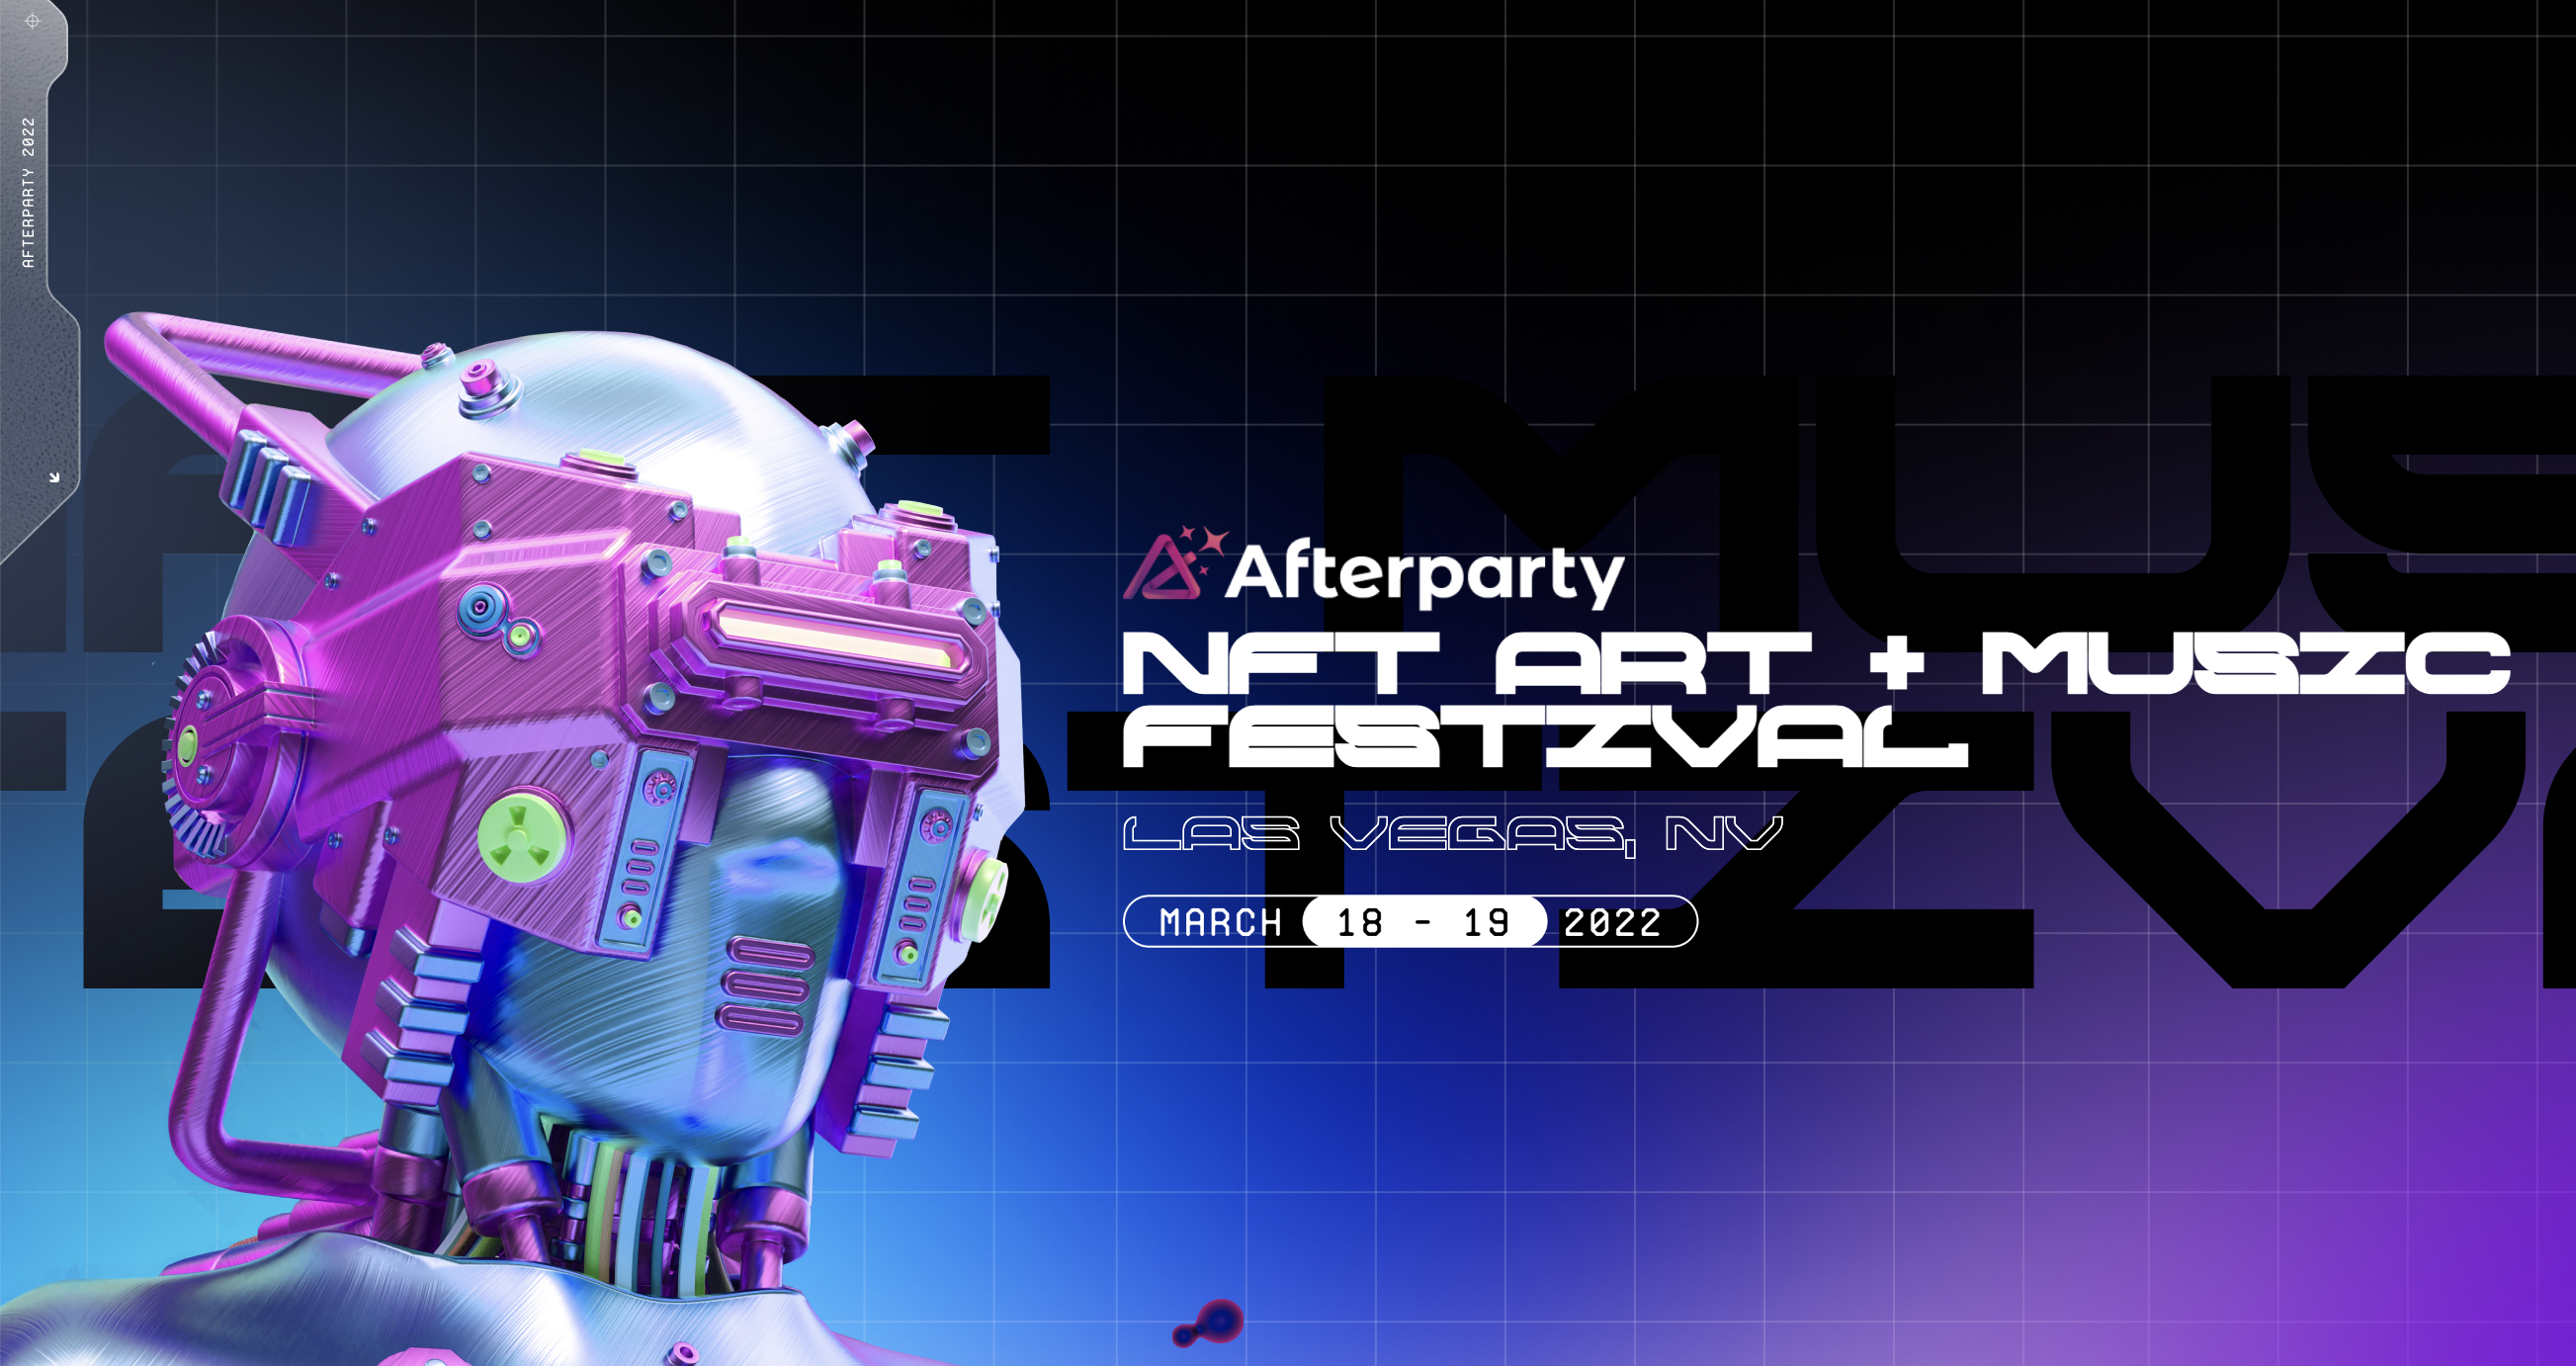 Las Vegas' Afterparty - NFT Art / Music in Match 2022